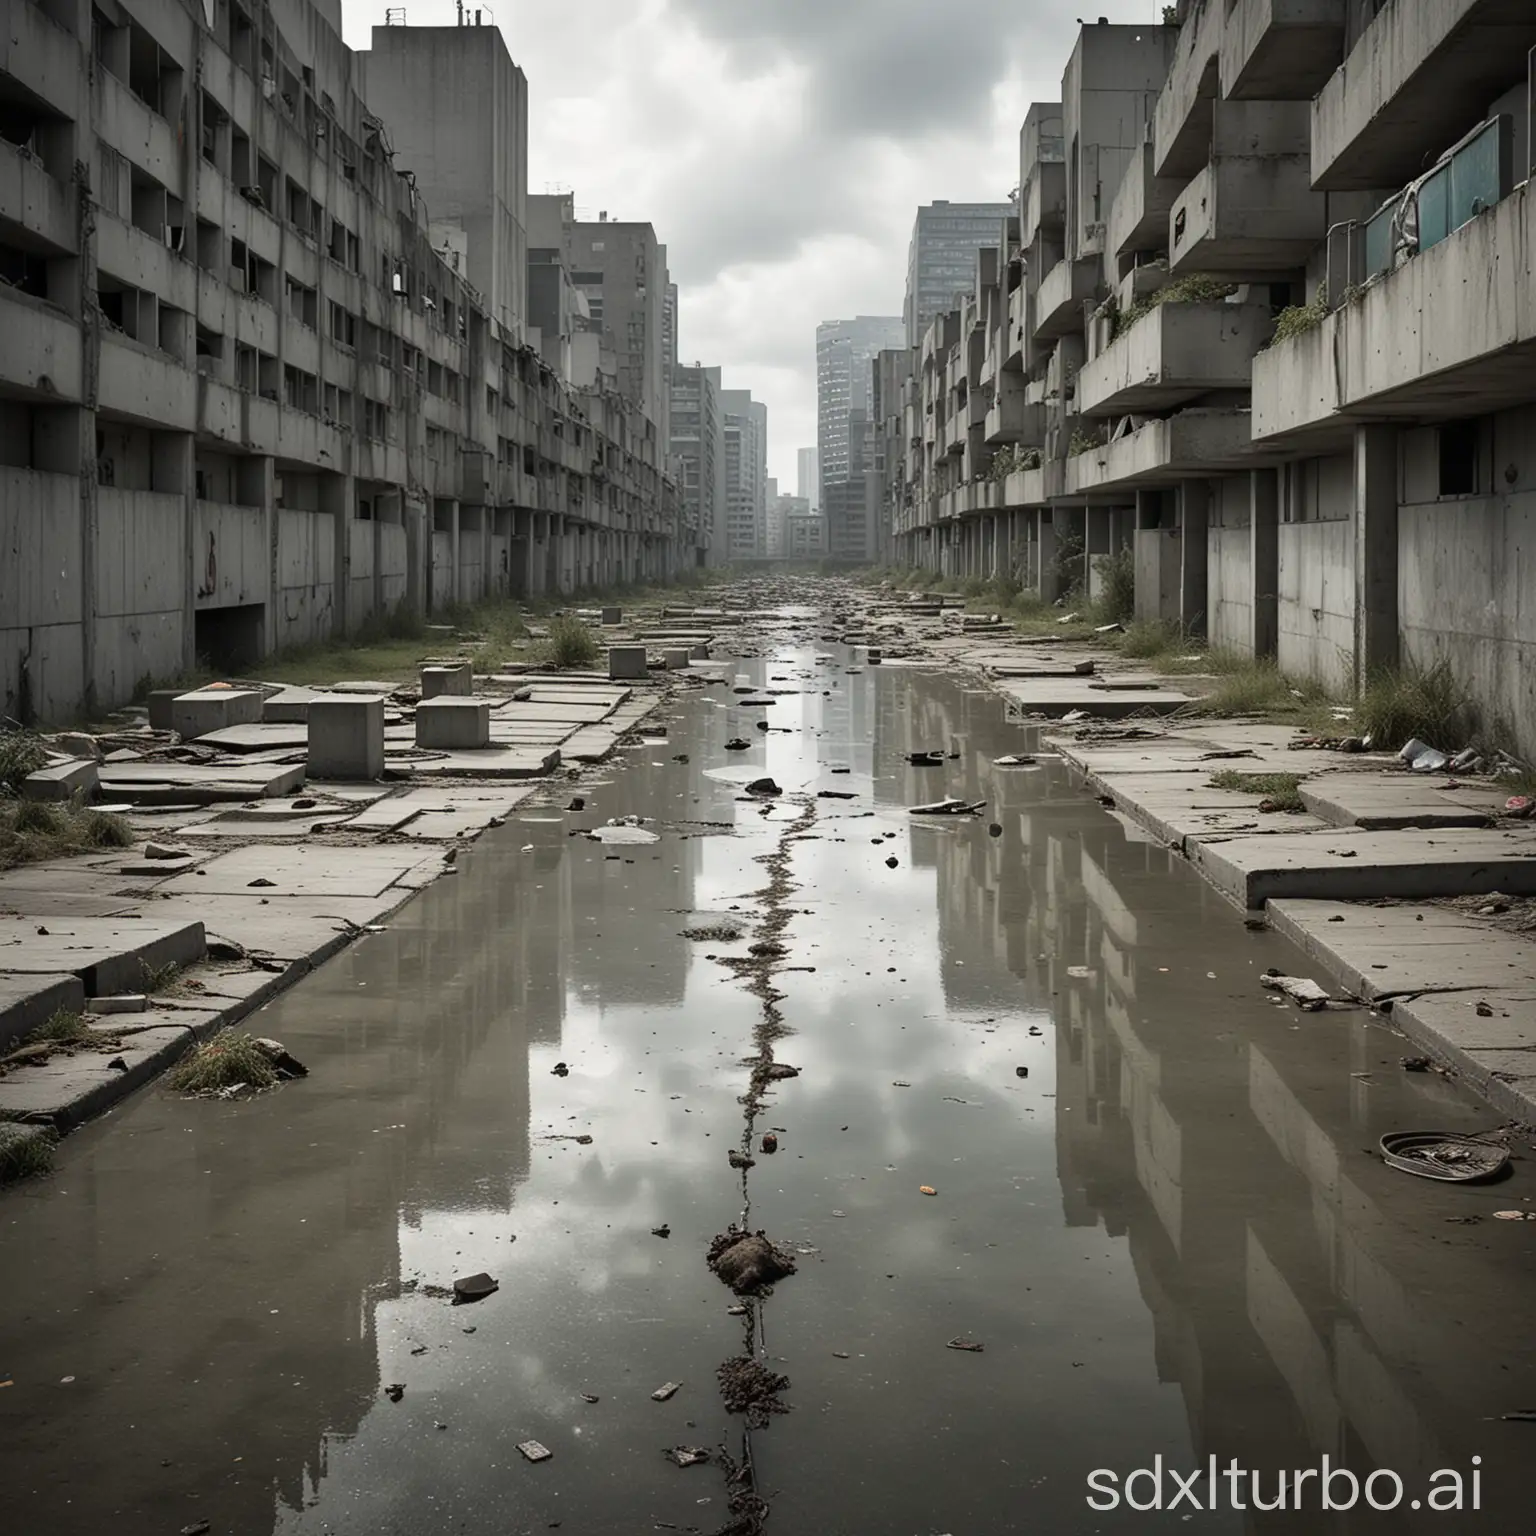 create an image of a dismal concrete city and cynical city